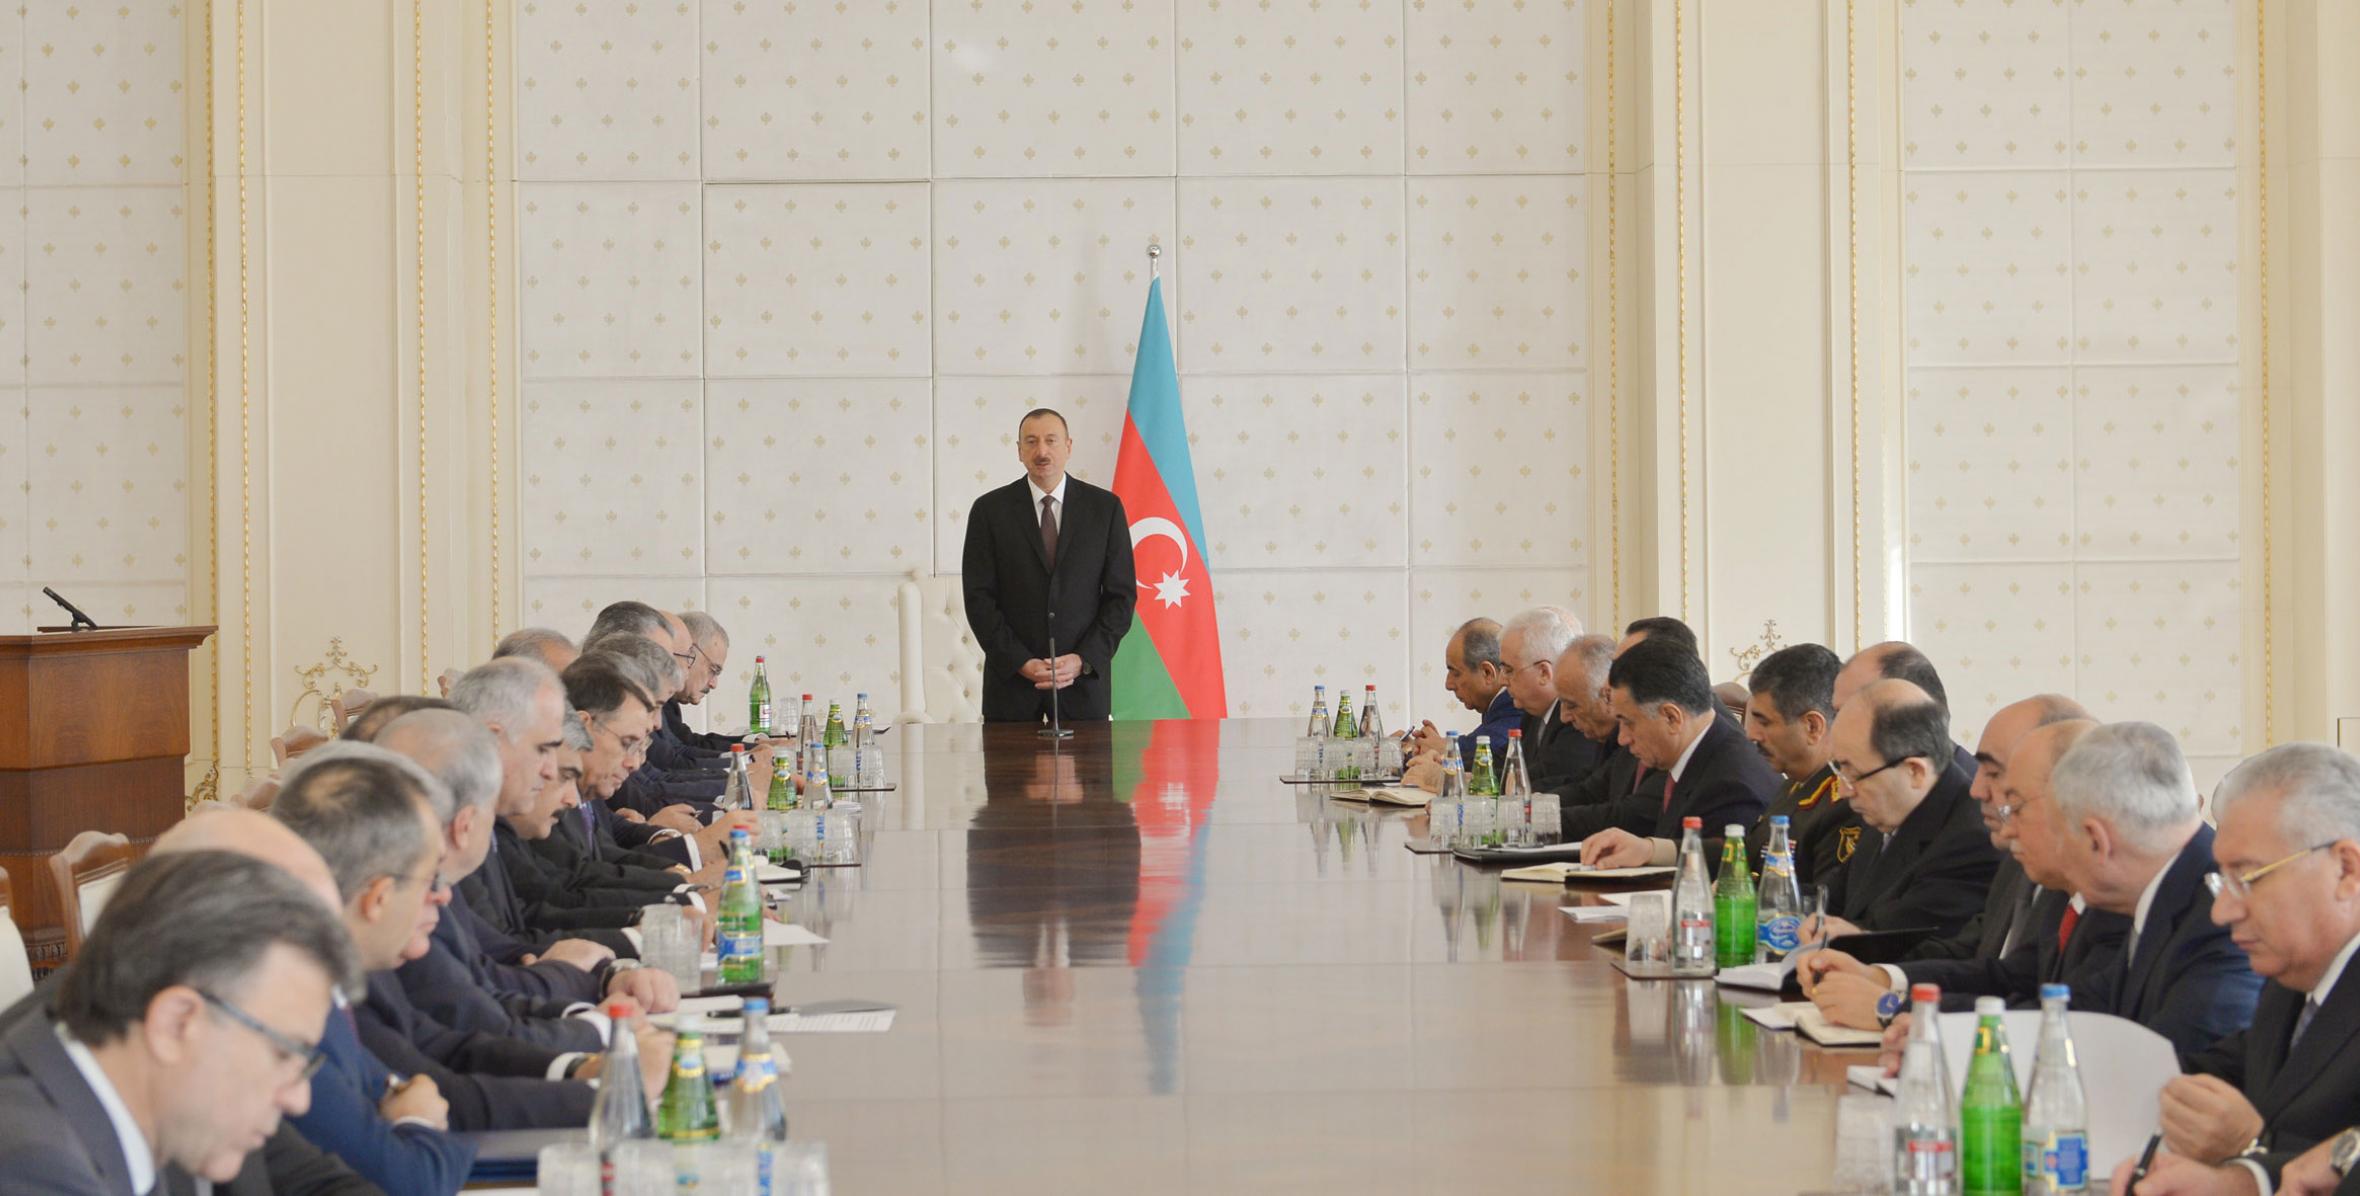 Opening speech by Ilham Aliyev at the meeting of the Cabinet of Ministers dedicated to the results of socioeconomic development in the first quarter of 2014 and objectives for the future